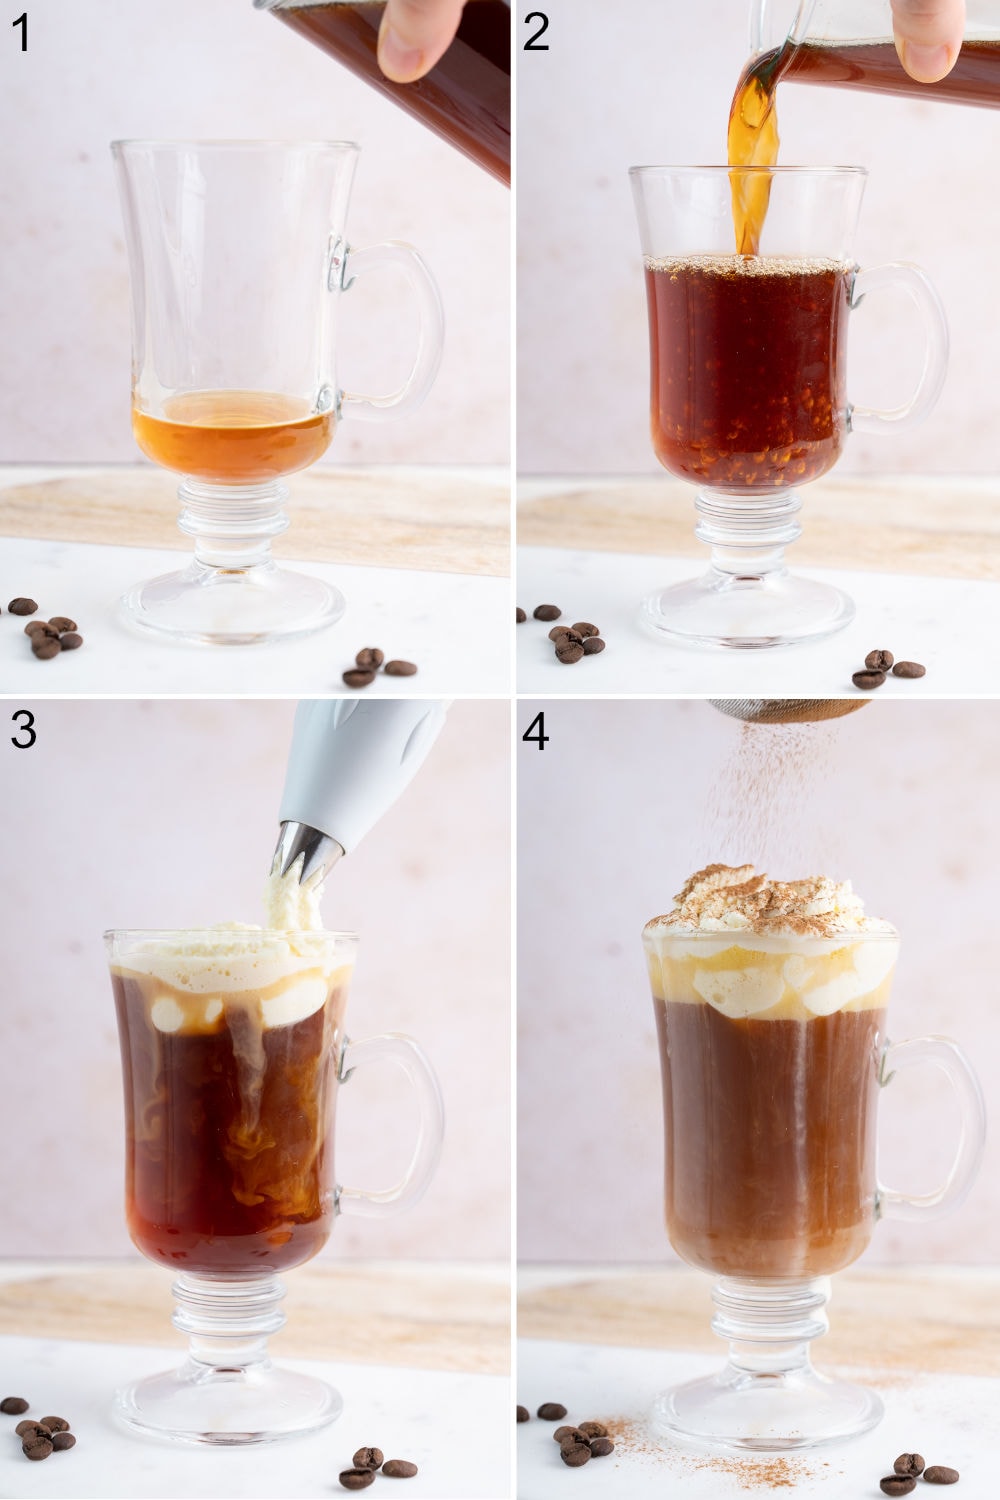 A collage of 4 photos showing how to make amaretto coffee step by step.